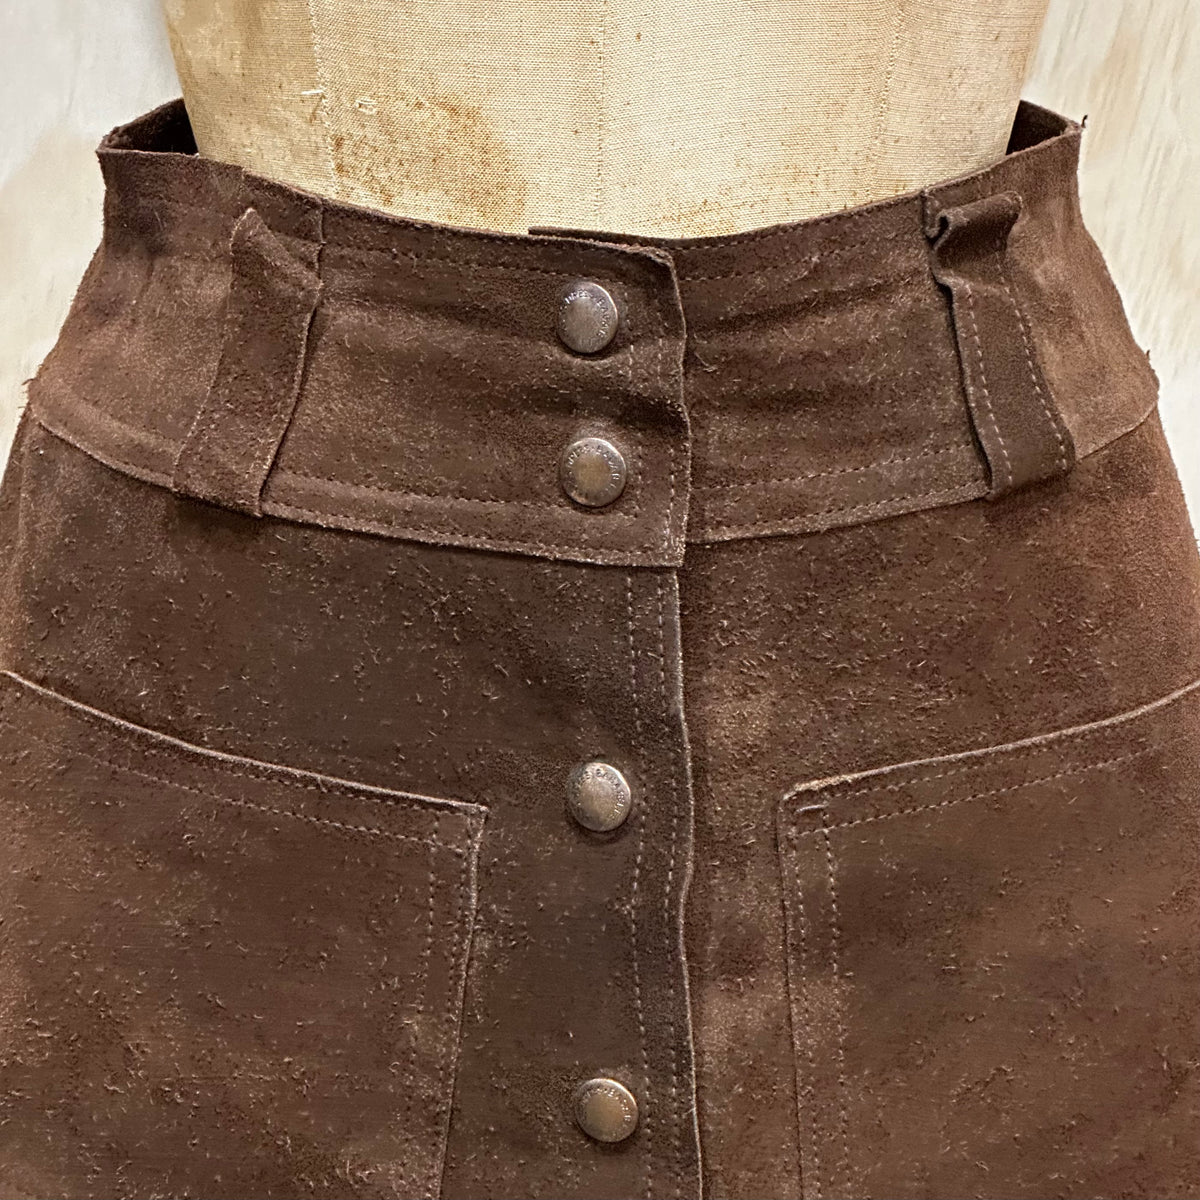 Vintage 60s Leather Mini Skirt • Brown Leather • Canadian Made